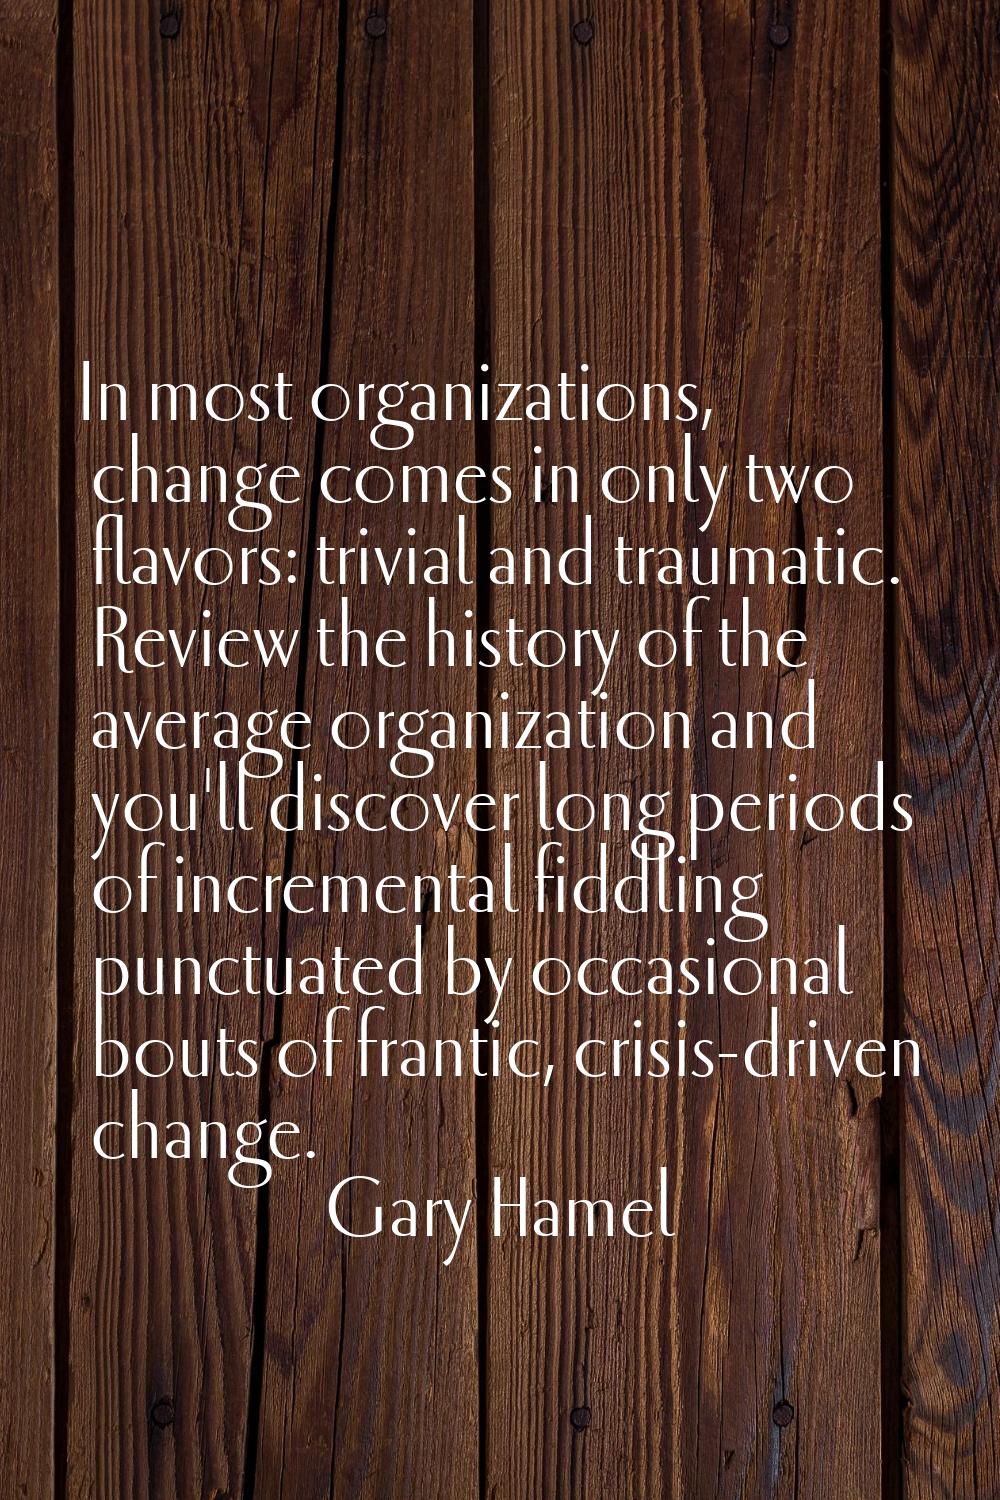 In most organizations, change comes in only two flavors: trivial and traumatic. Review the history 